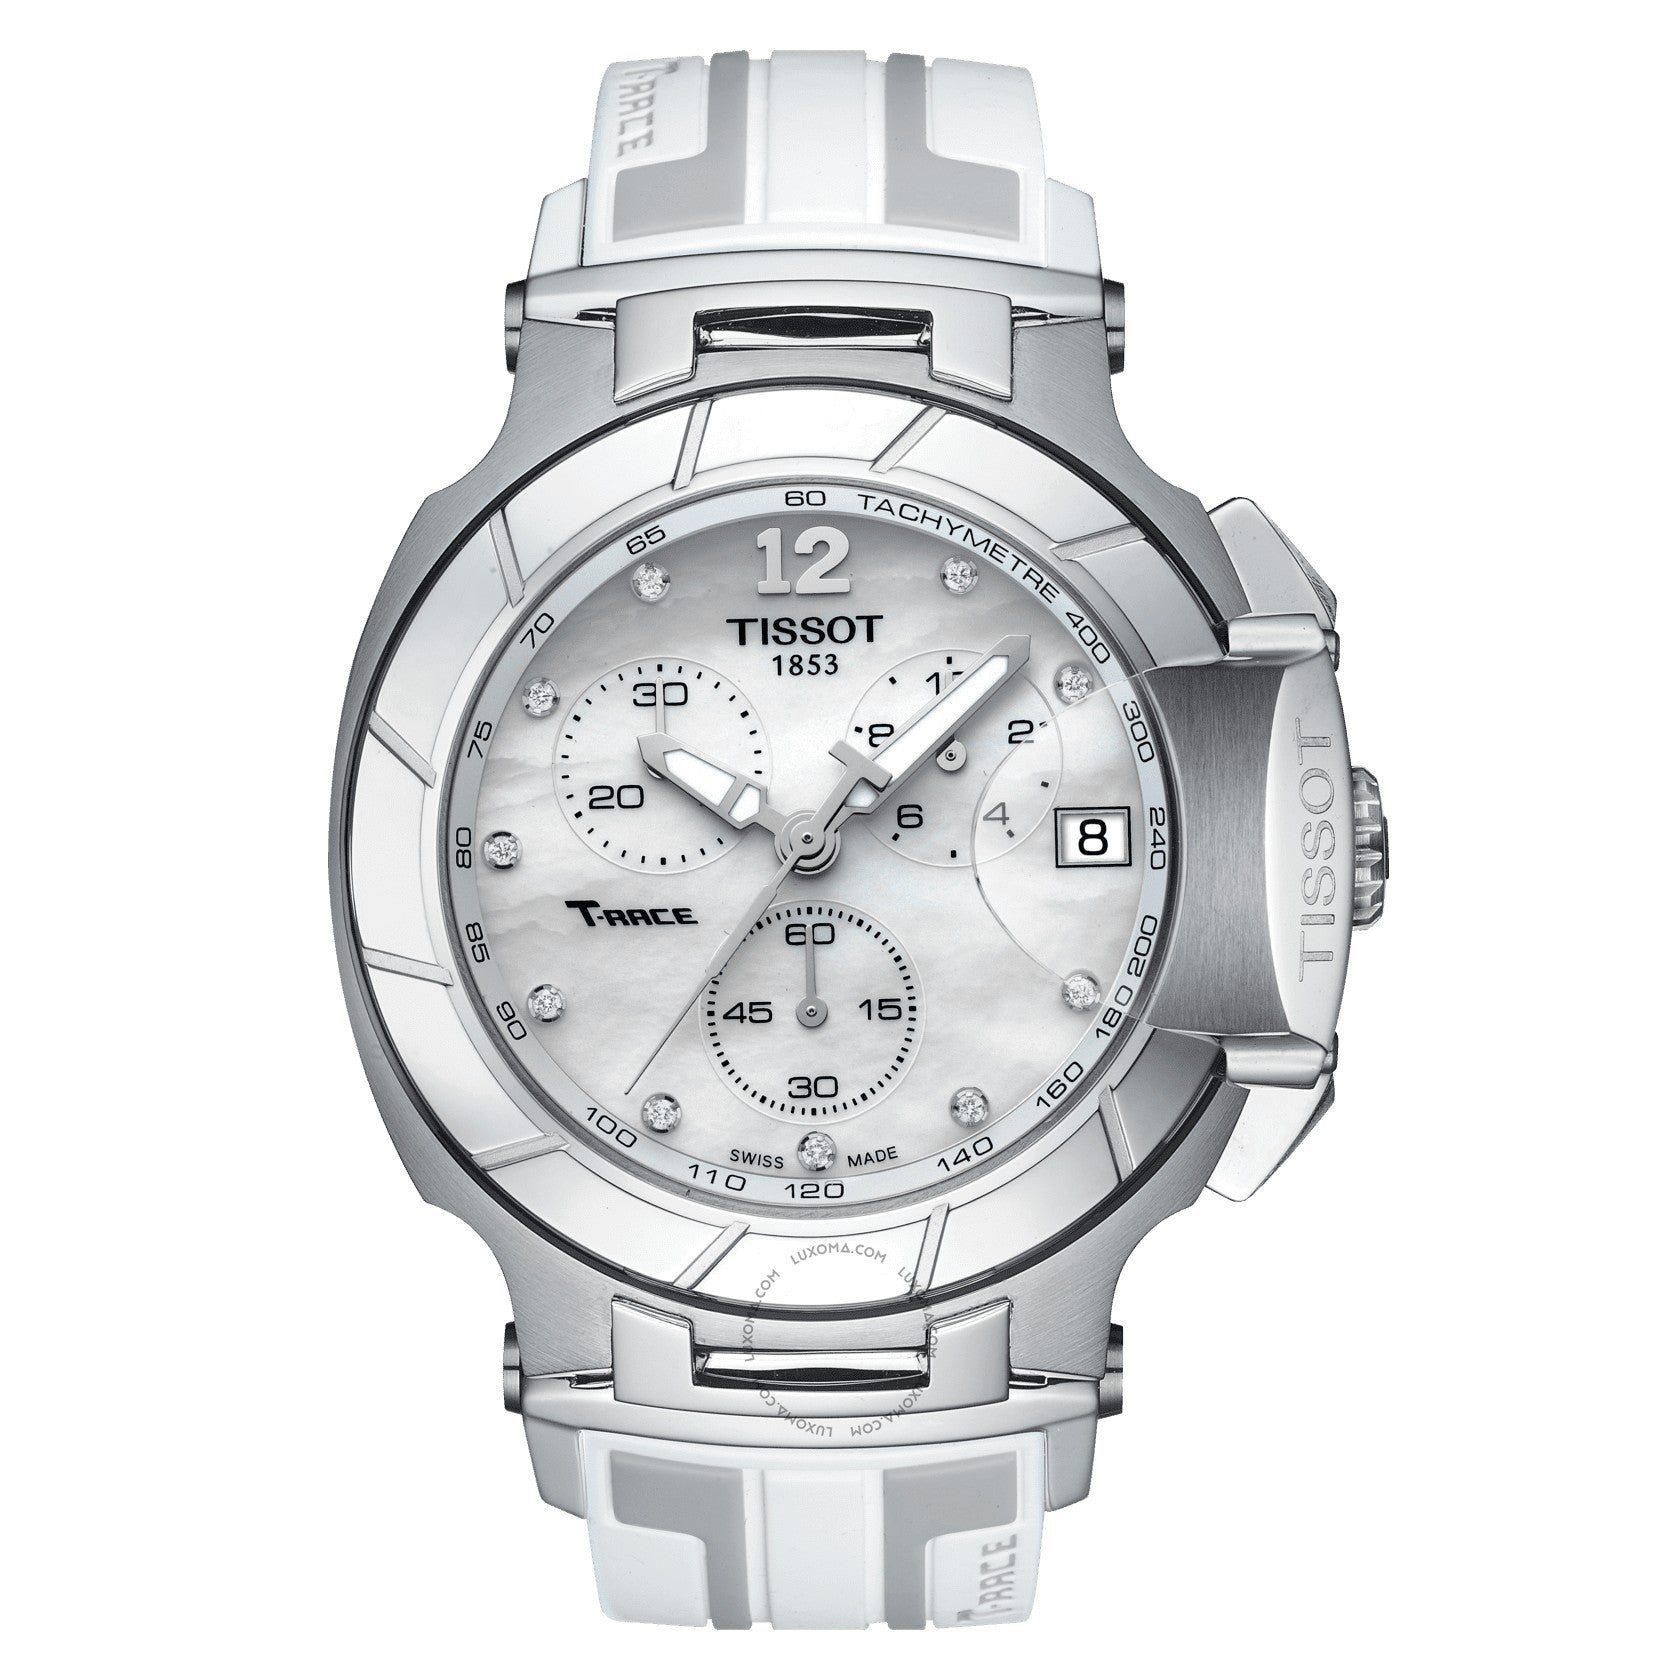 Tissot T-Race Chronograph White Mother of Pearl Dial Unisex Watch T048.417.17.116.00